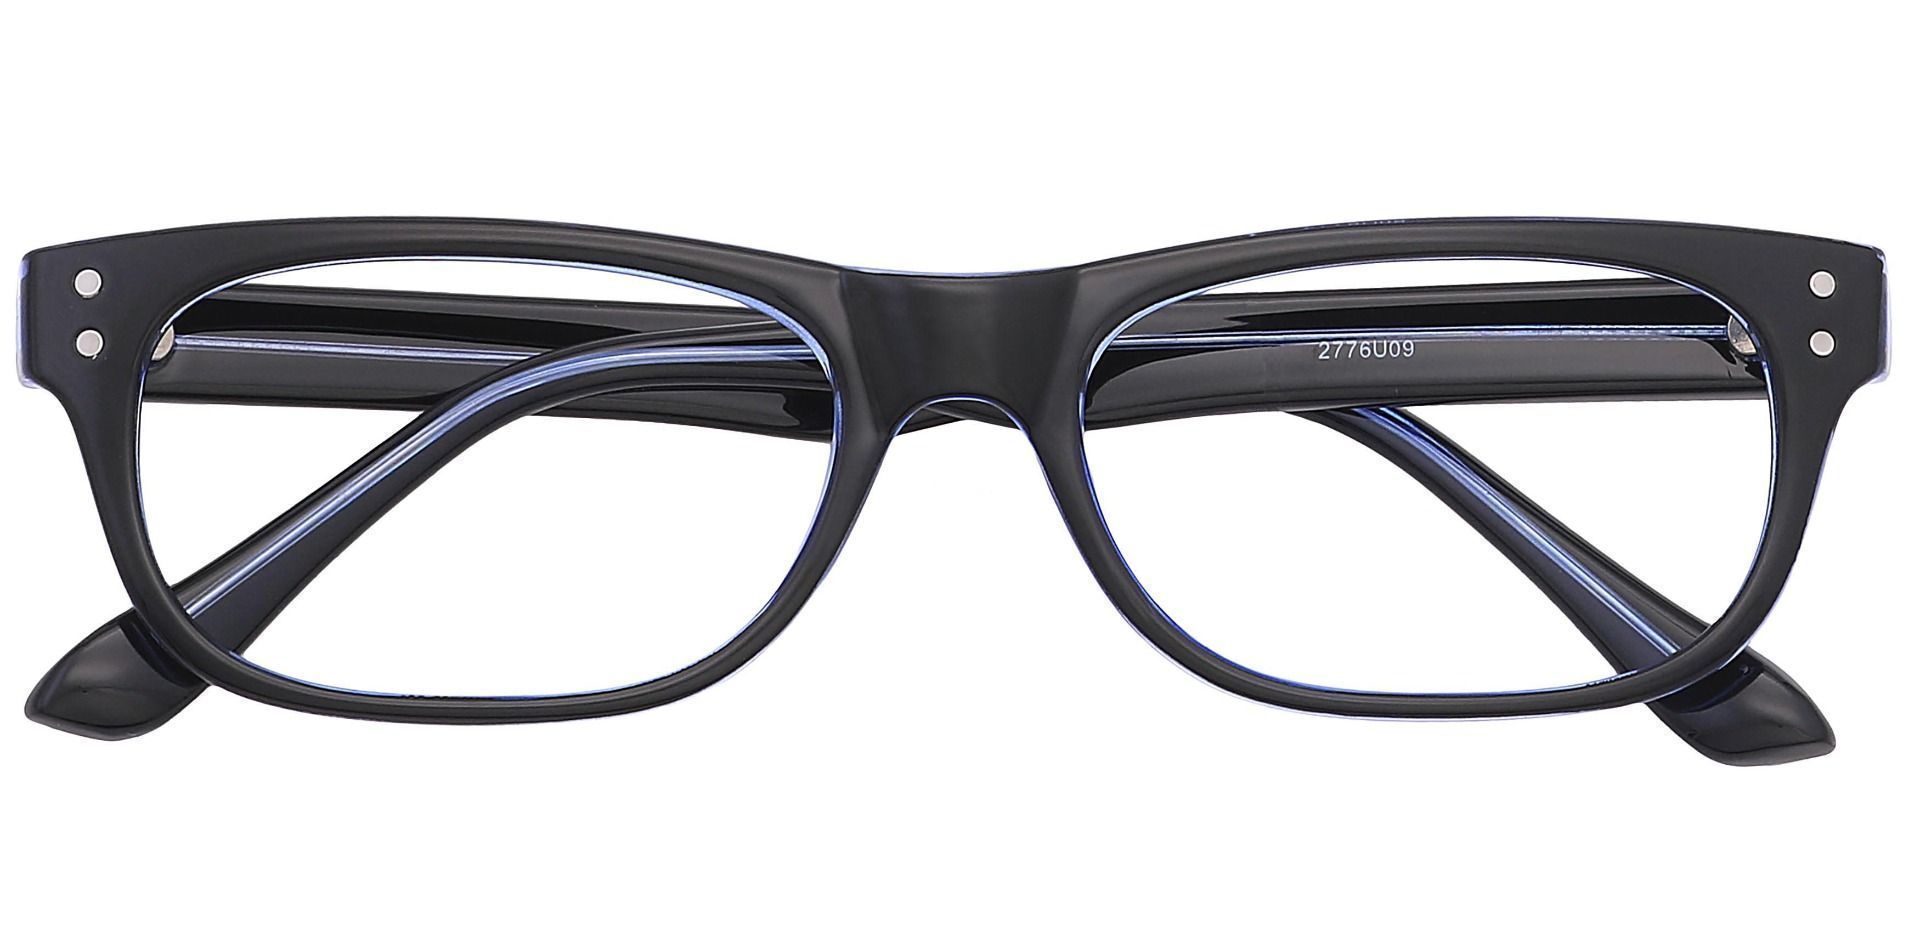 Murphy Rectangle Prescription Glasses - The Frame Is Blue And Black